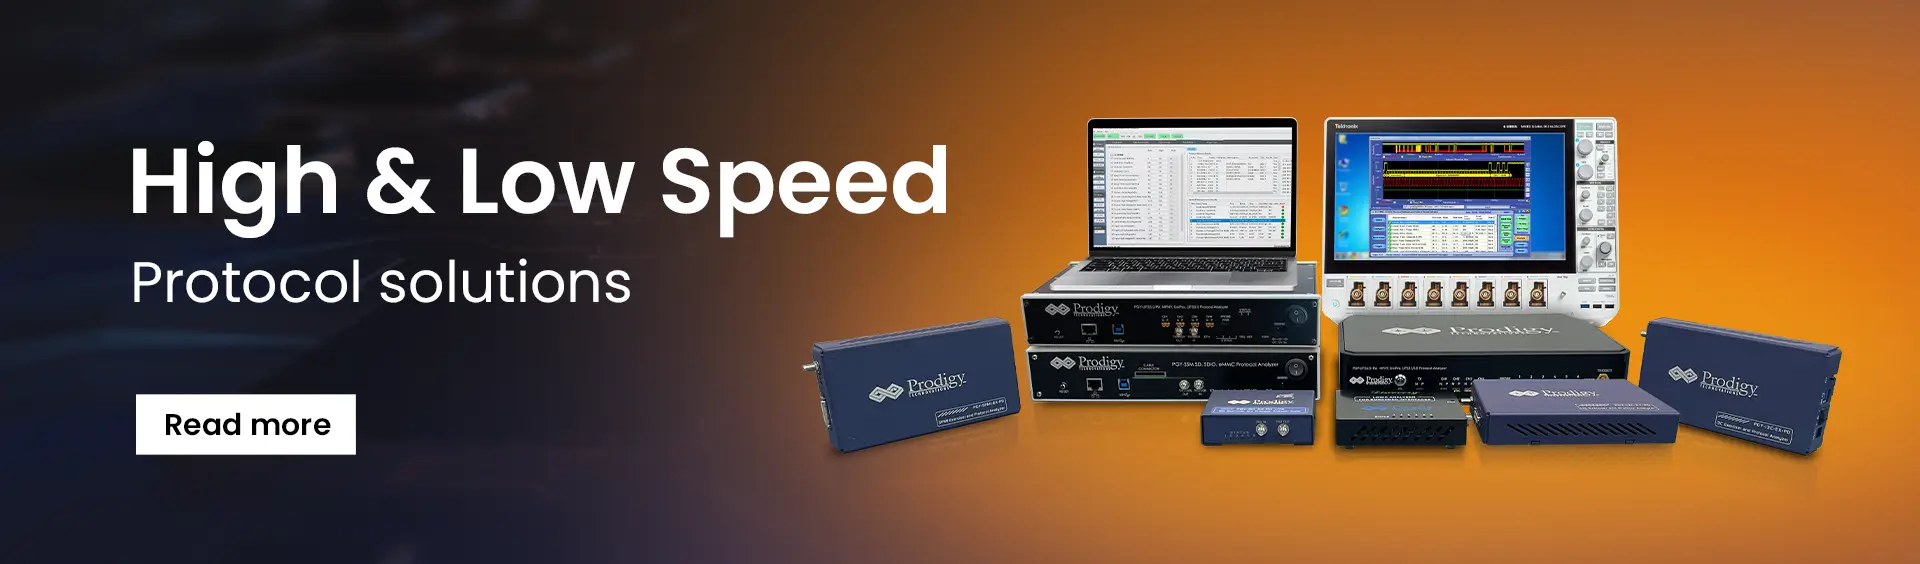 High & Low Speed Protocol Solutions